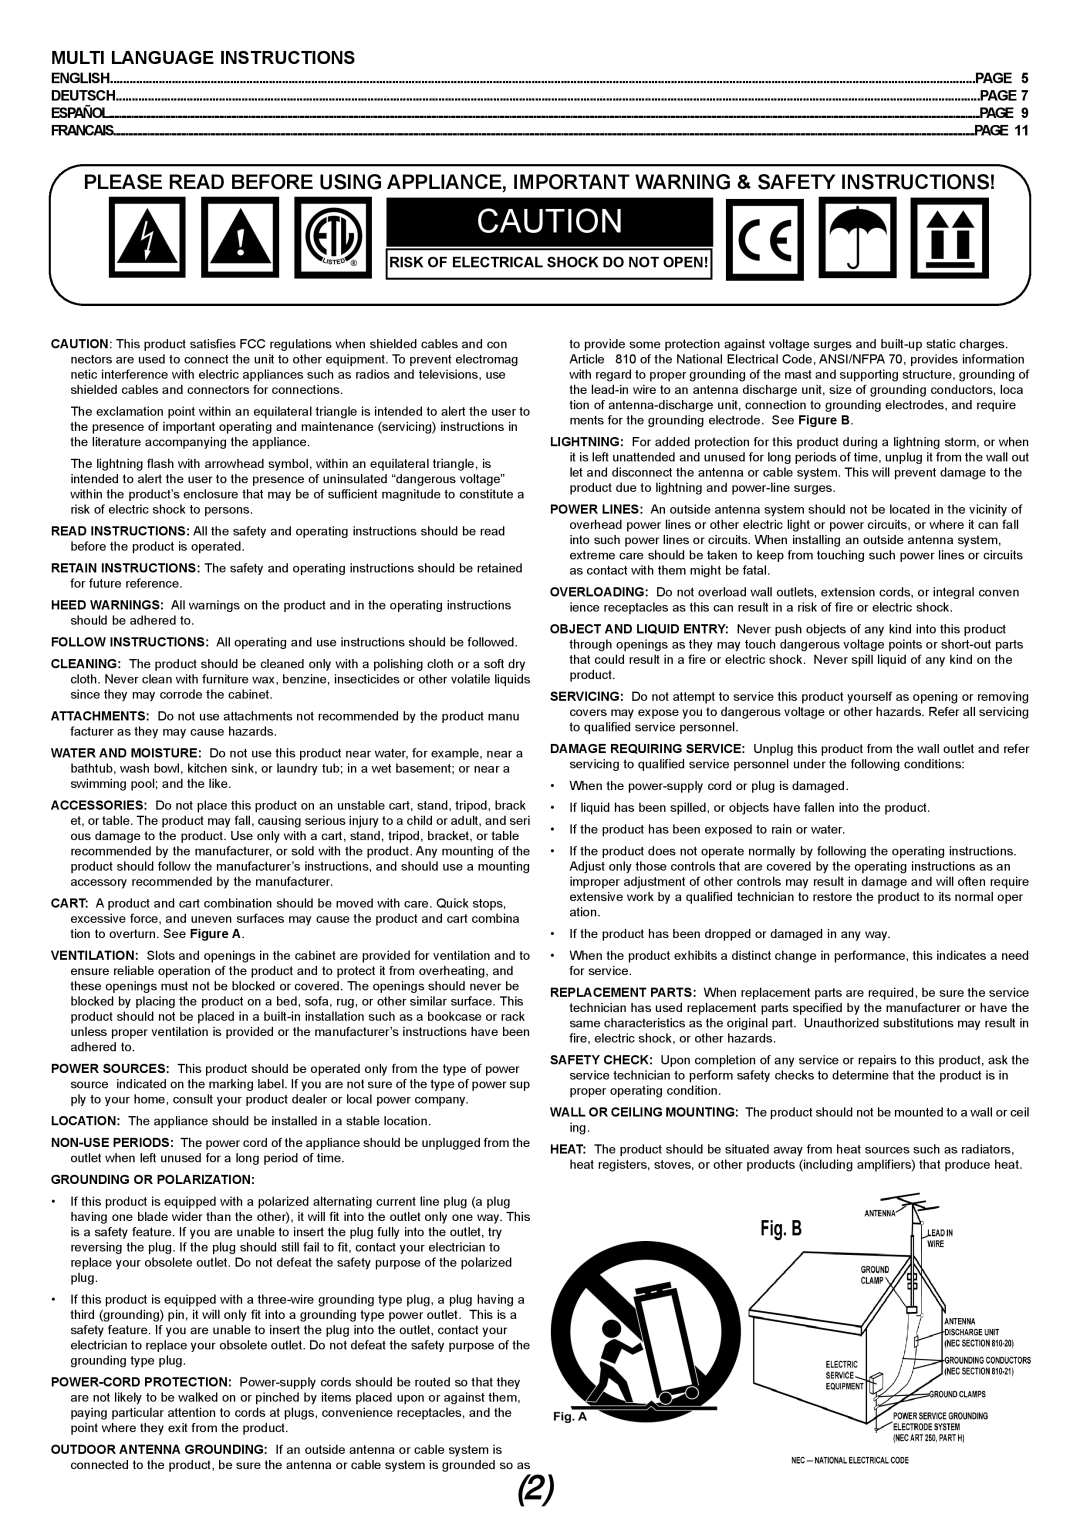 Gemini XL-120MKII manual Multi Language Instructions, Page, Risk Of Electrical Shock Do Not Open, Grounding Or Polarization 